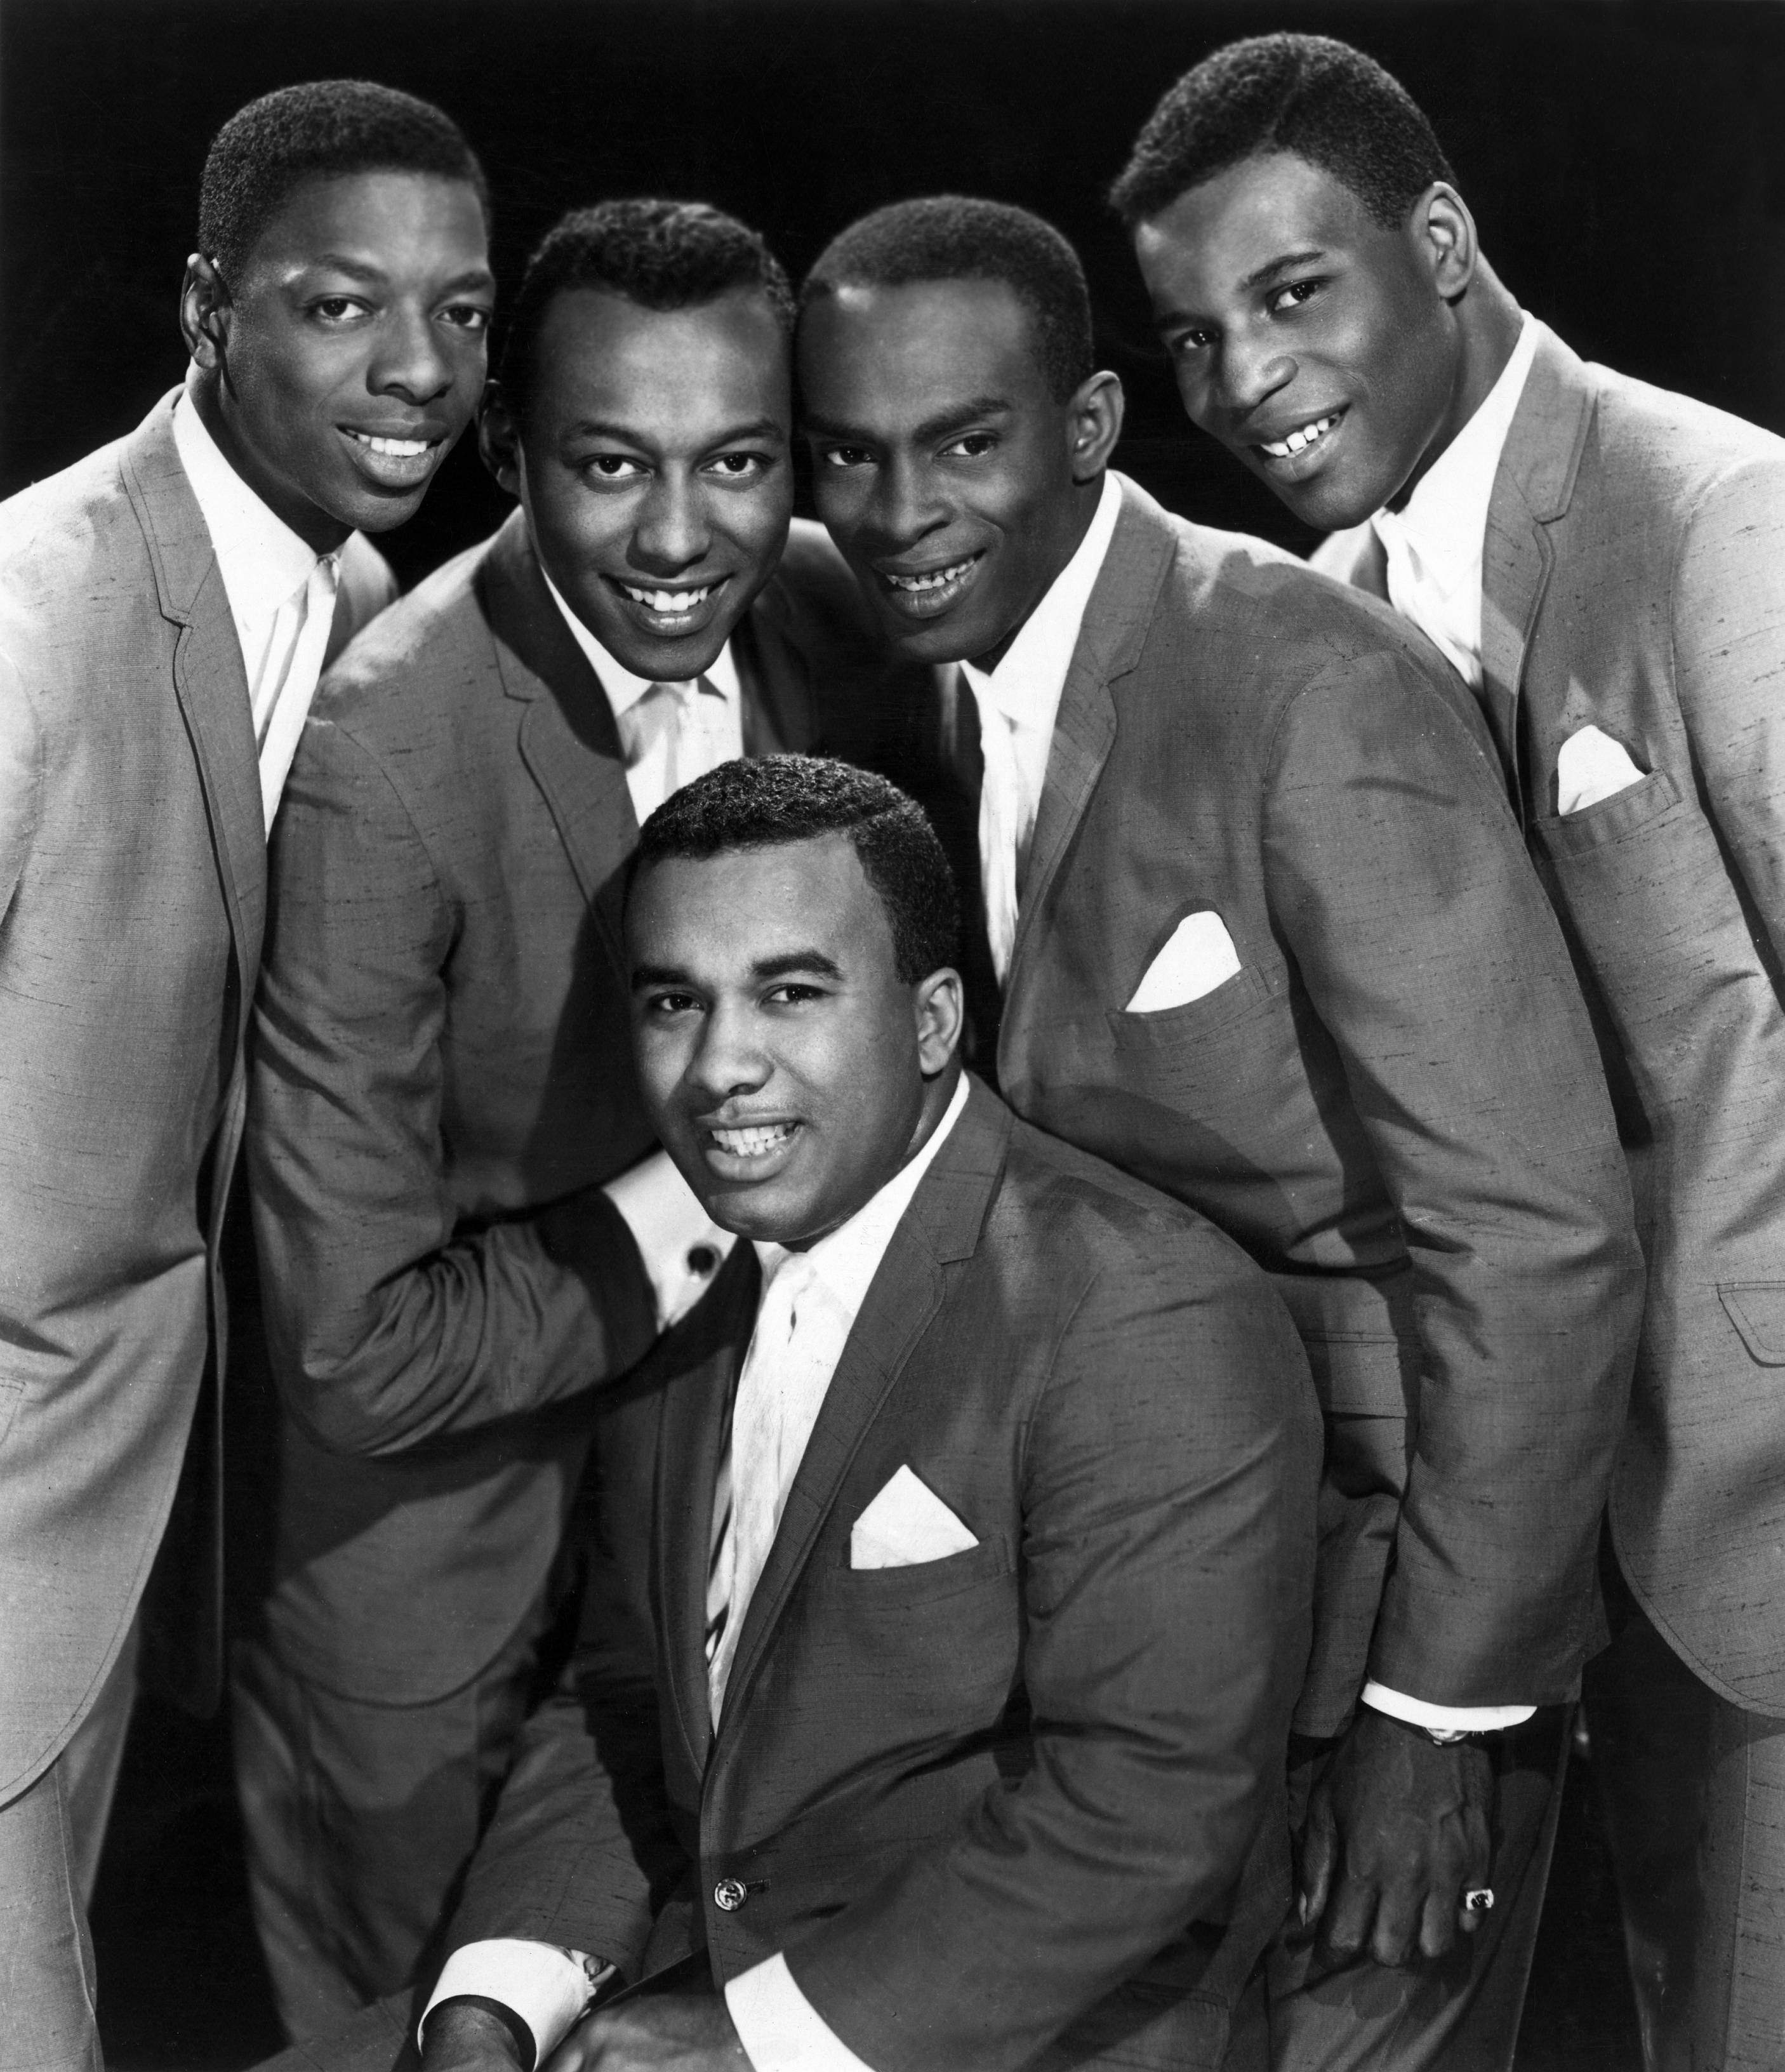 Fambrough was the last surviving member of The Spinners